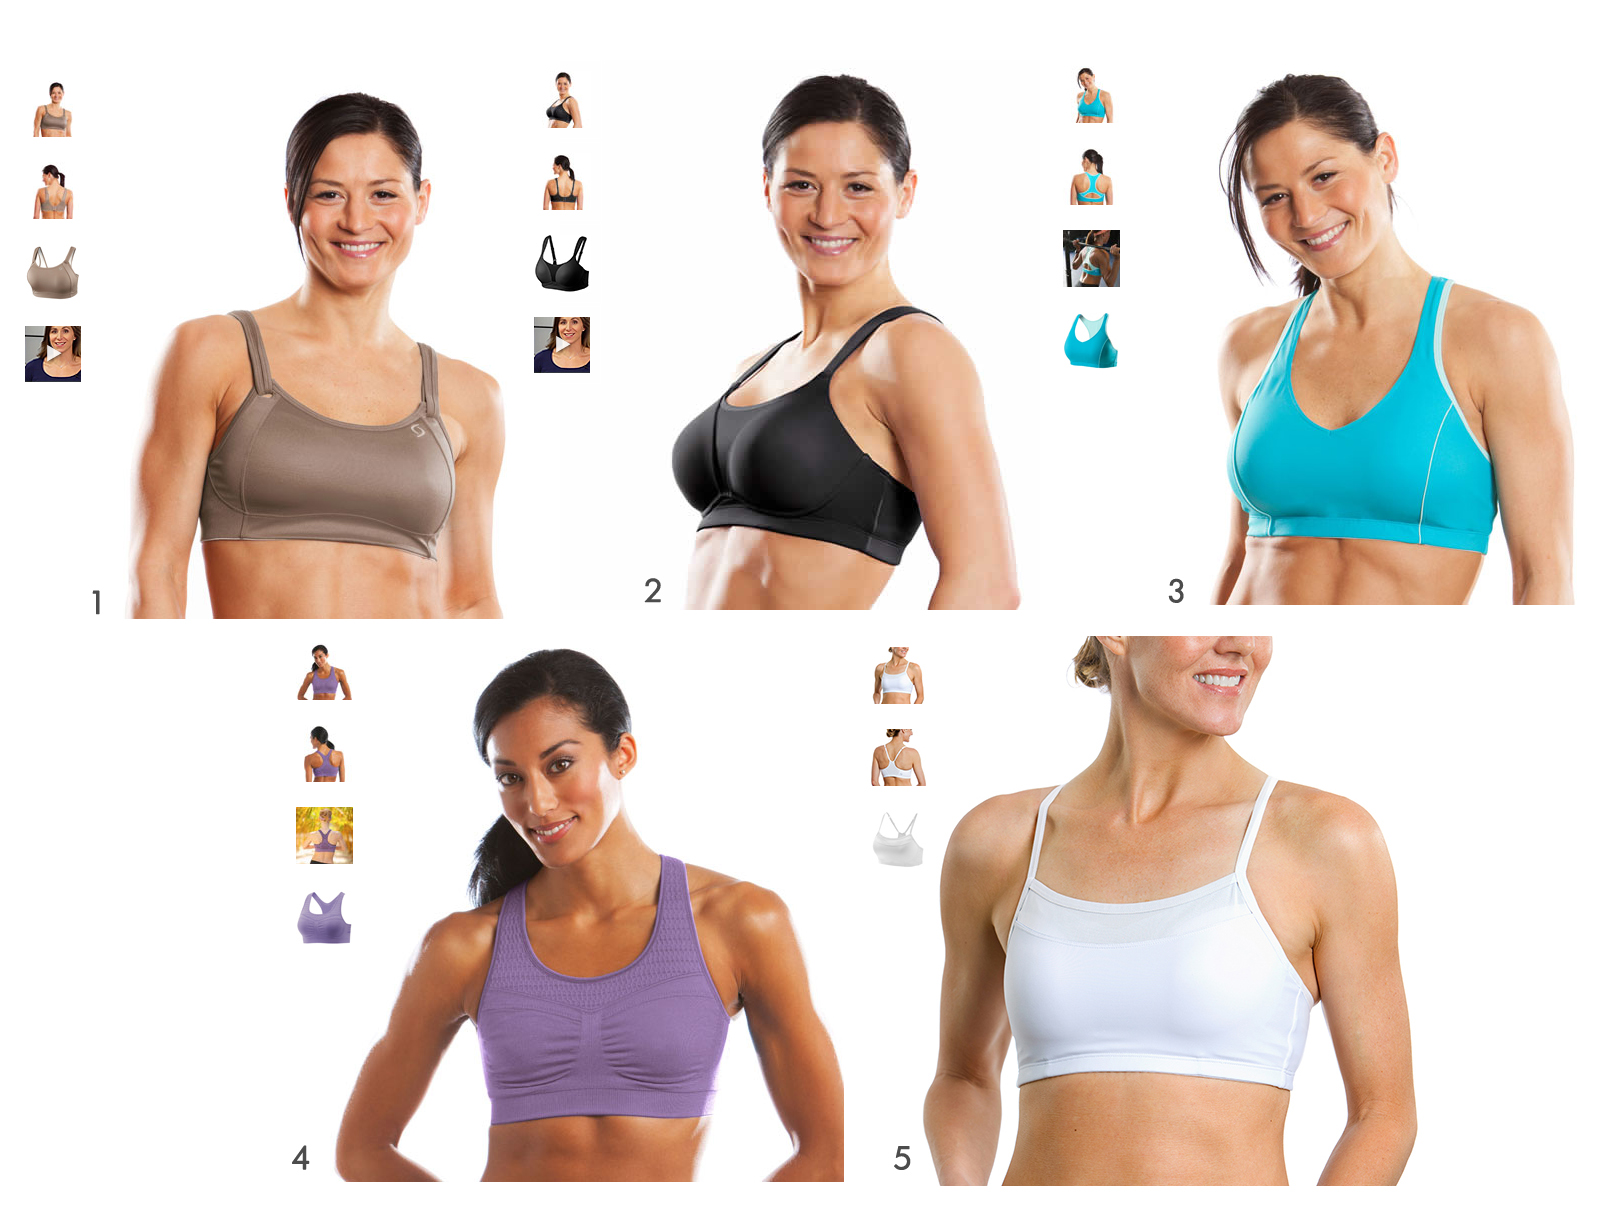 How to choose the right sports bra - How to choose the right sports bra